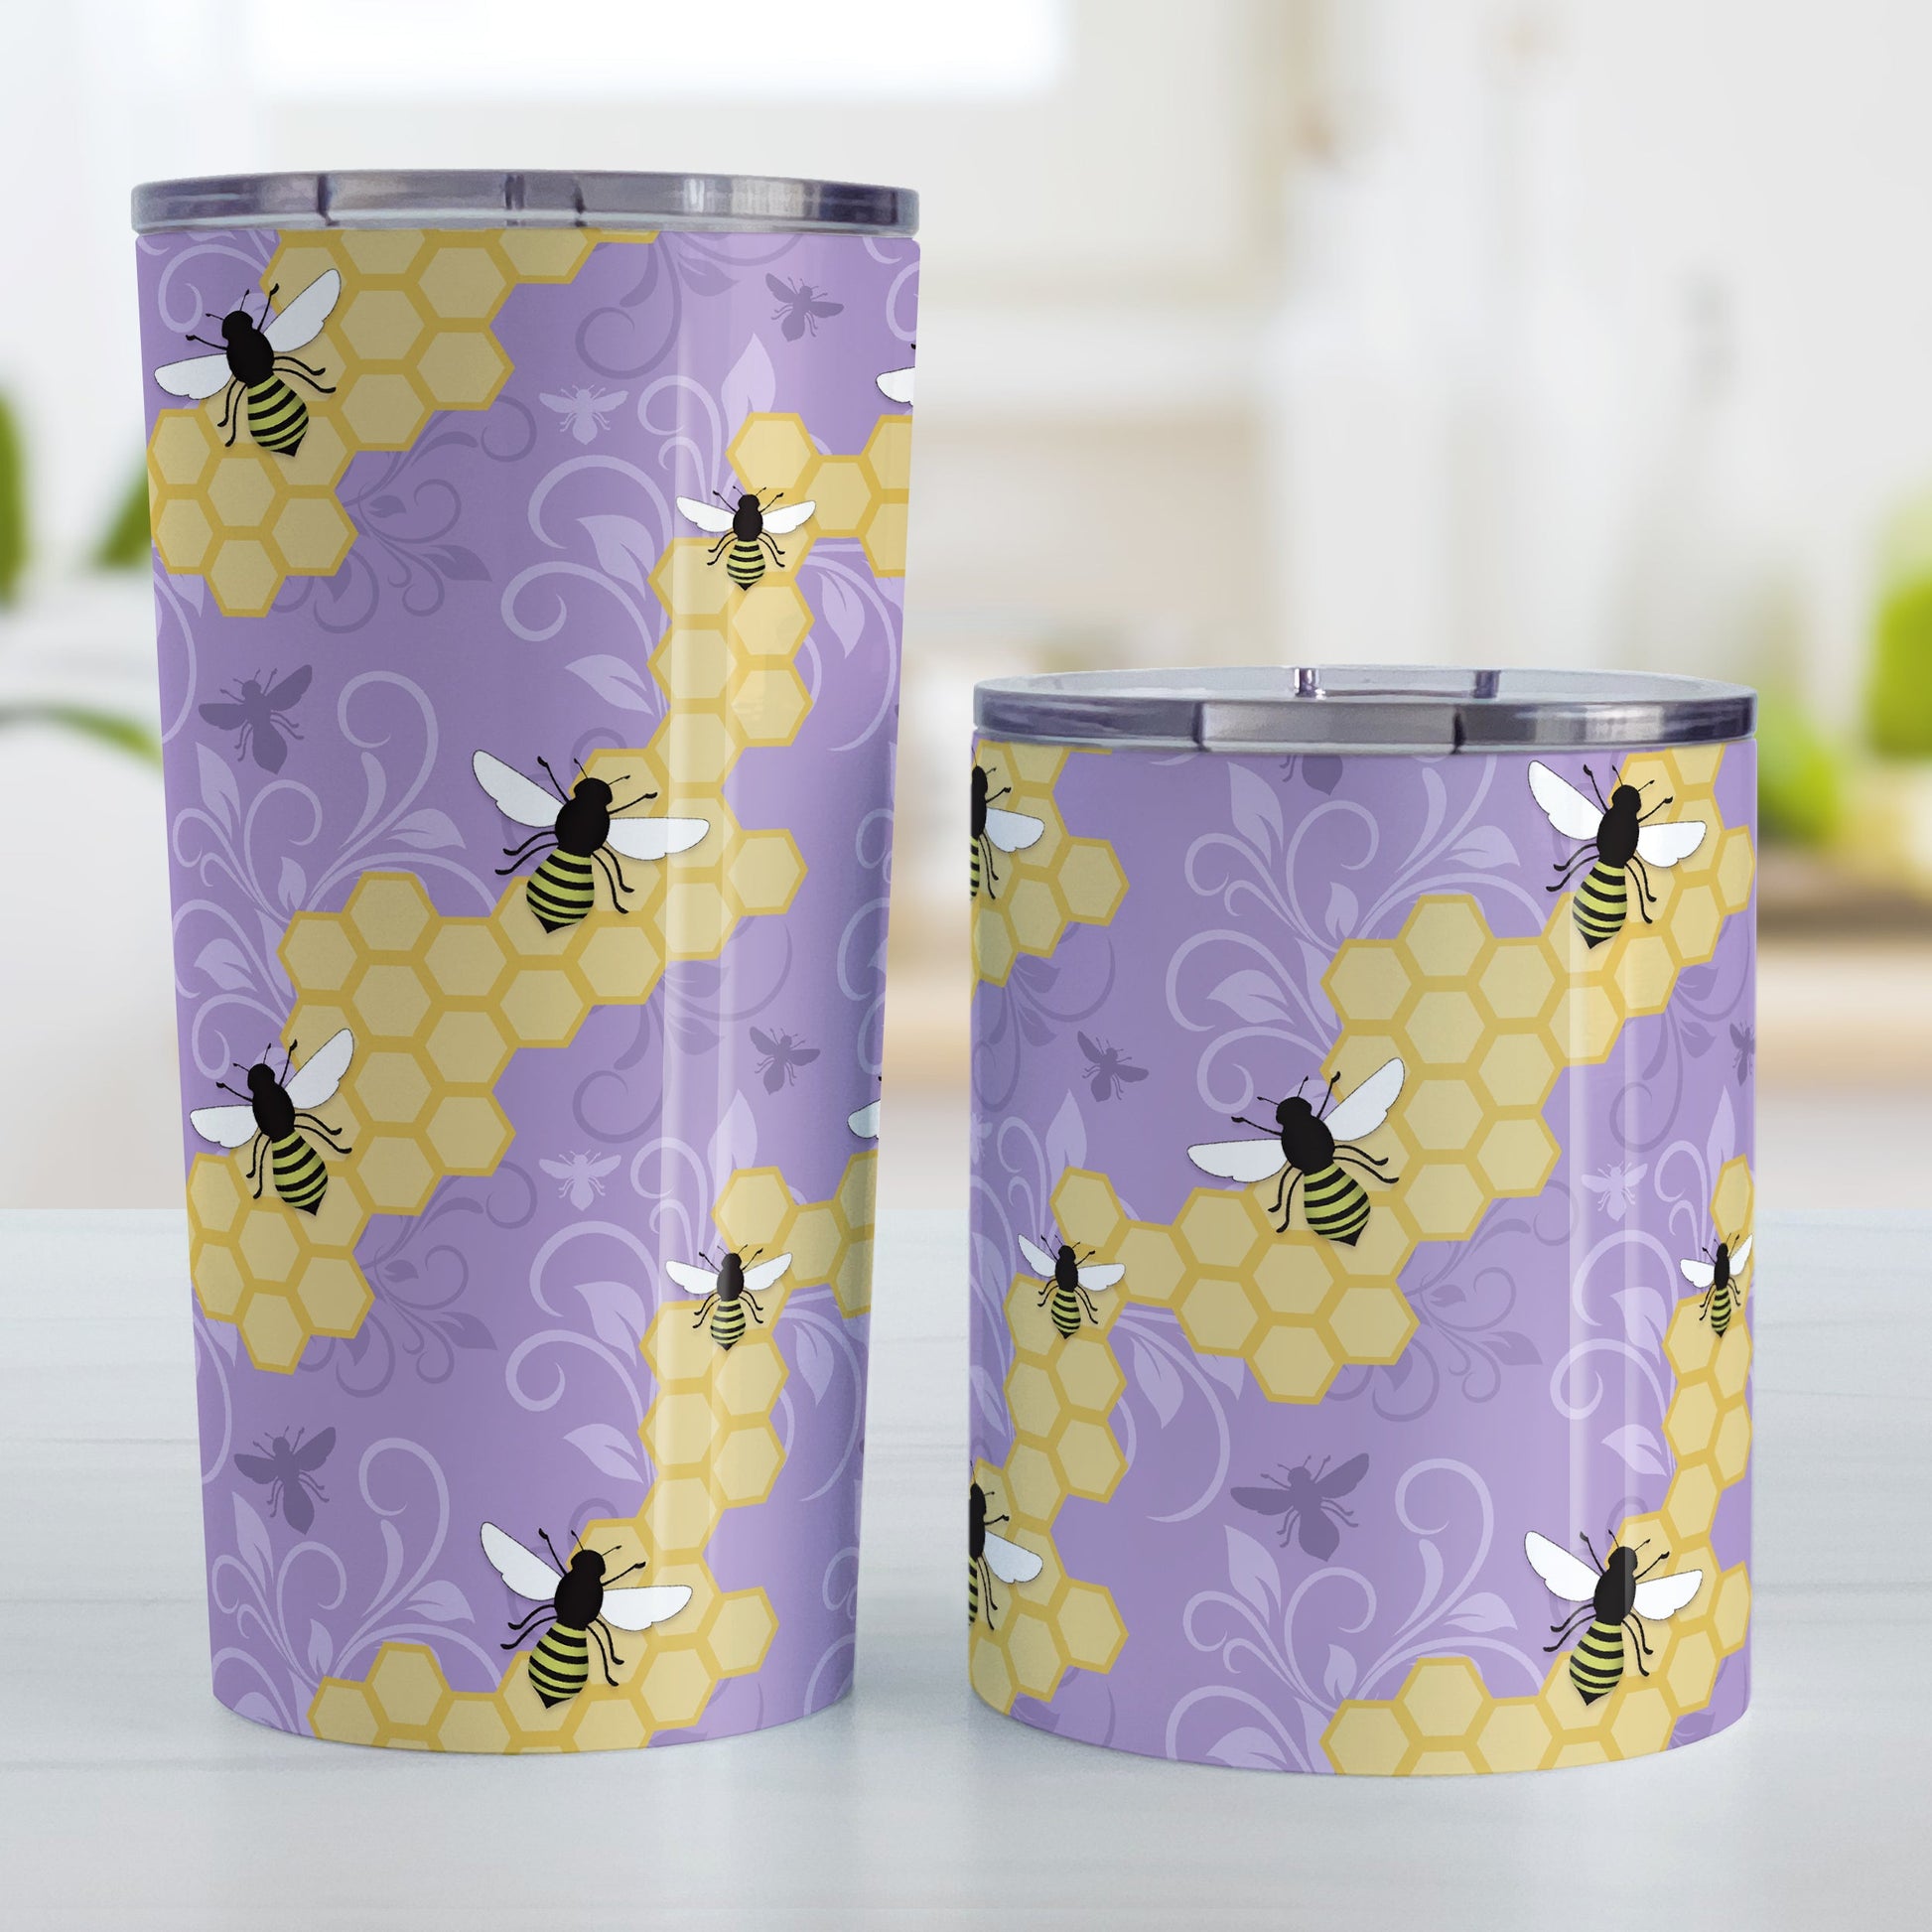 Purple Honeycomb Bee Tumbler Cup (20oz and 10oz, stainless steel insulated) at Amy's Coffee Mugs. Tumbler cups designed with a pattern of black and yellow bees on honeycomb lines over a purple flourish background that wraps around the cups. Photo shows both sized cups next to each other.